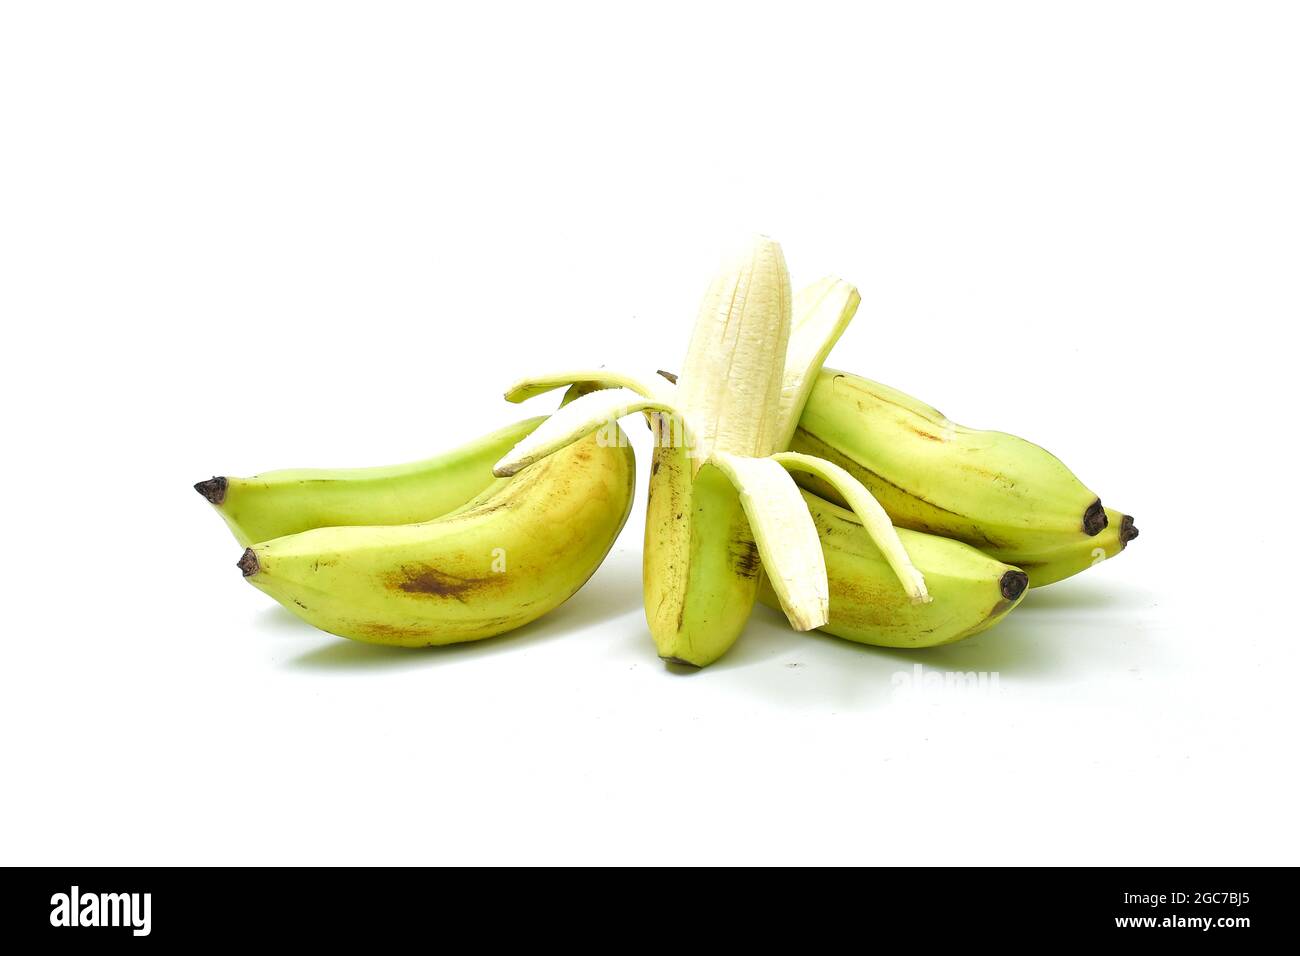 Banana tropical fruit selected from background Stock Photo